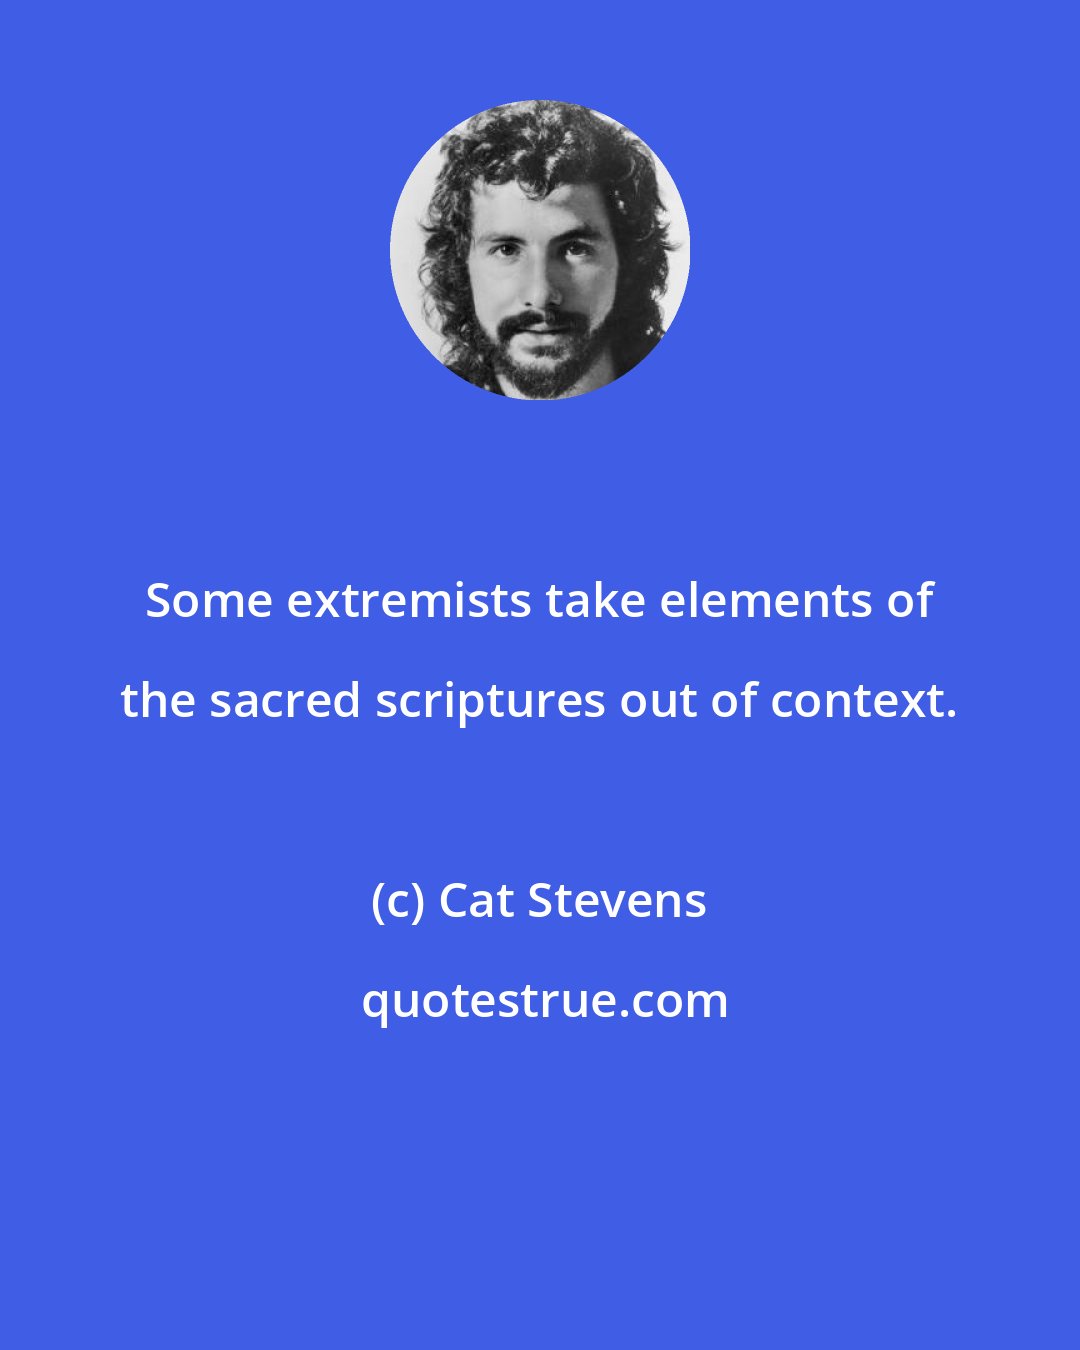 Cat Stevens: Some extremists take elements of the sacred scriptures out of context.